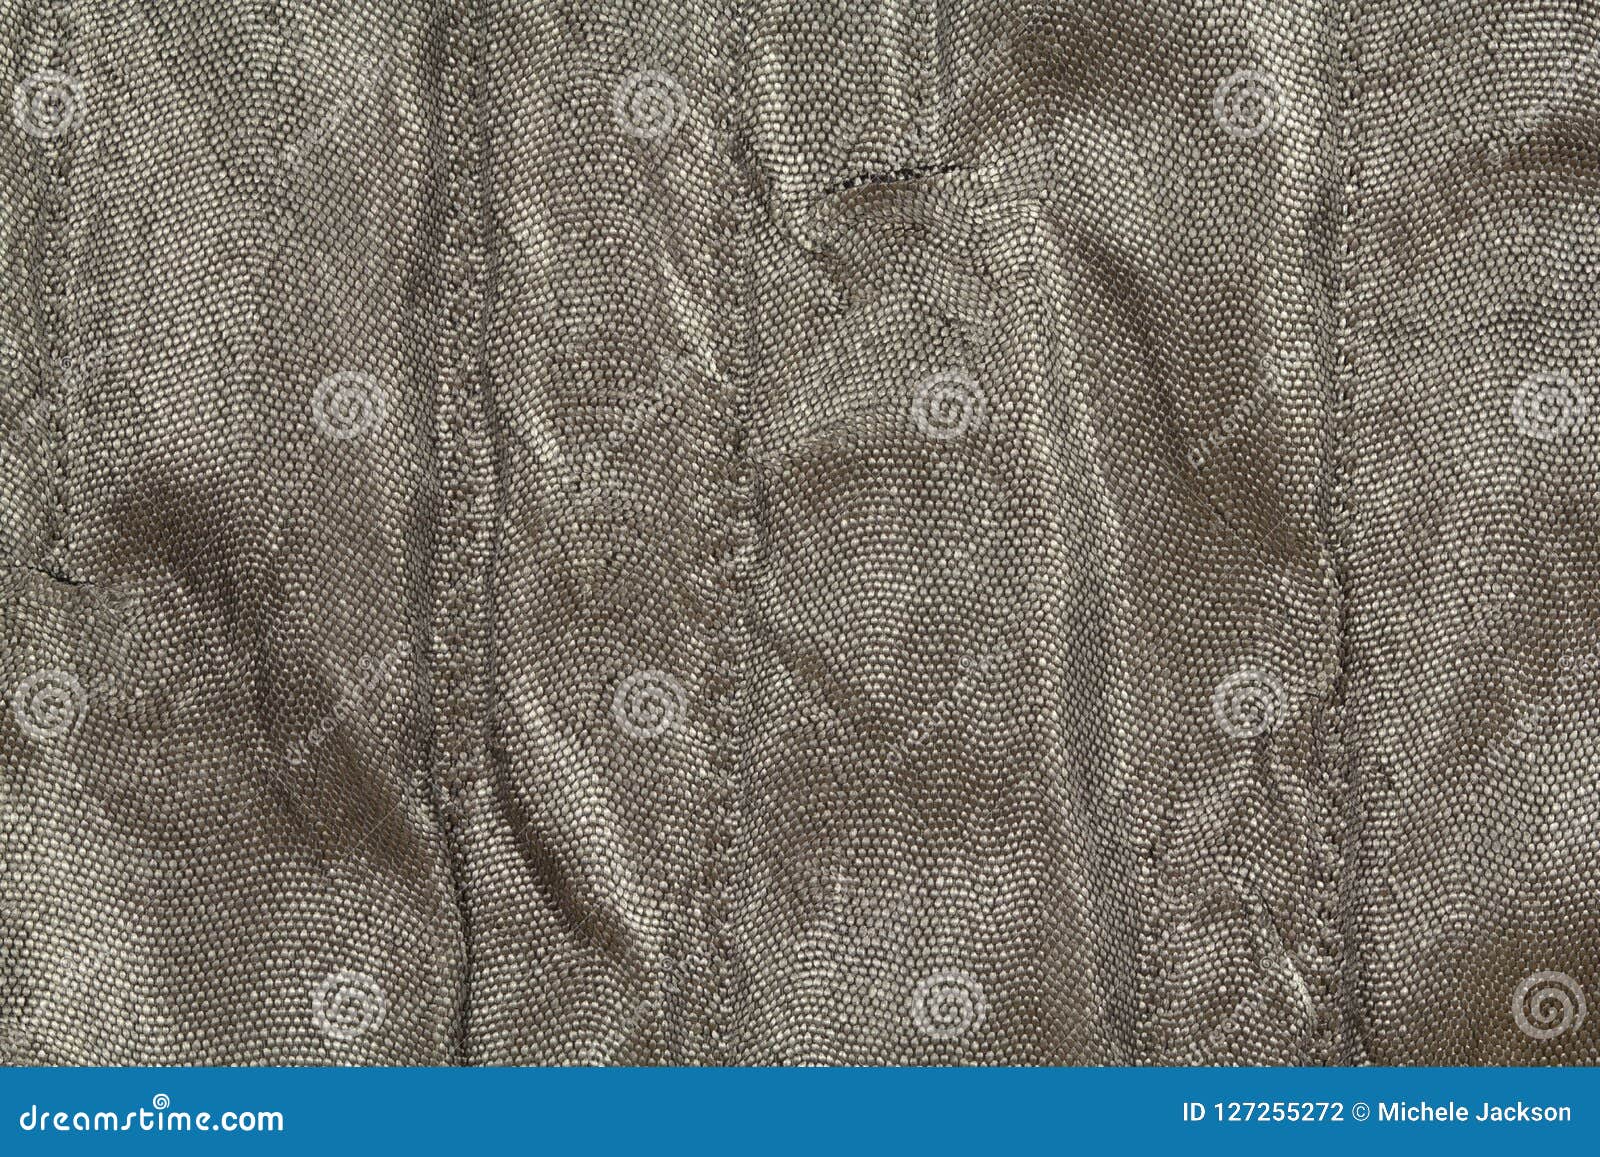 Background Texture on Grey Cloth Stock Photo - Image of material ...